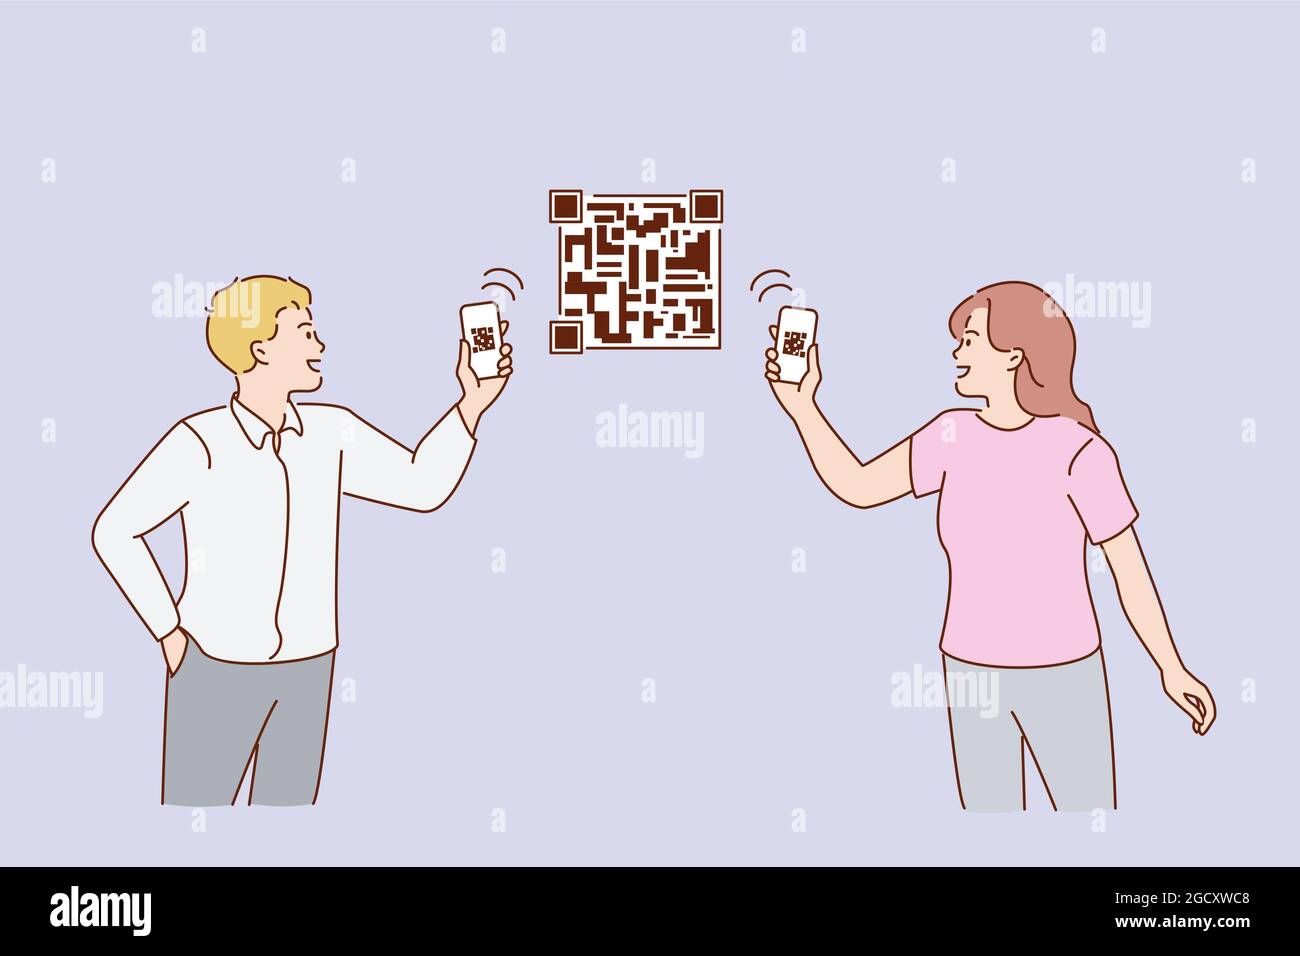 Scanning QR codes with phone concept. Young couple man and woman standing holding smartphones and scanning QR codes on picture together online vector illustration  Stock Vector